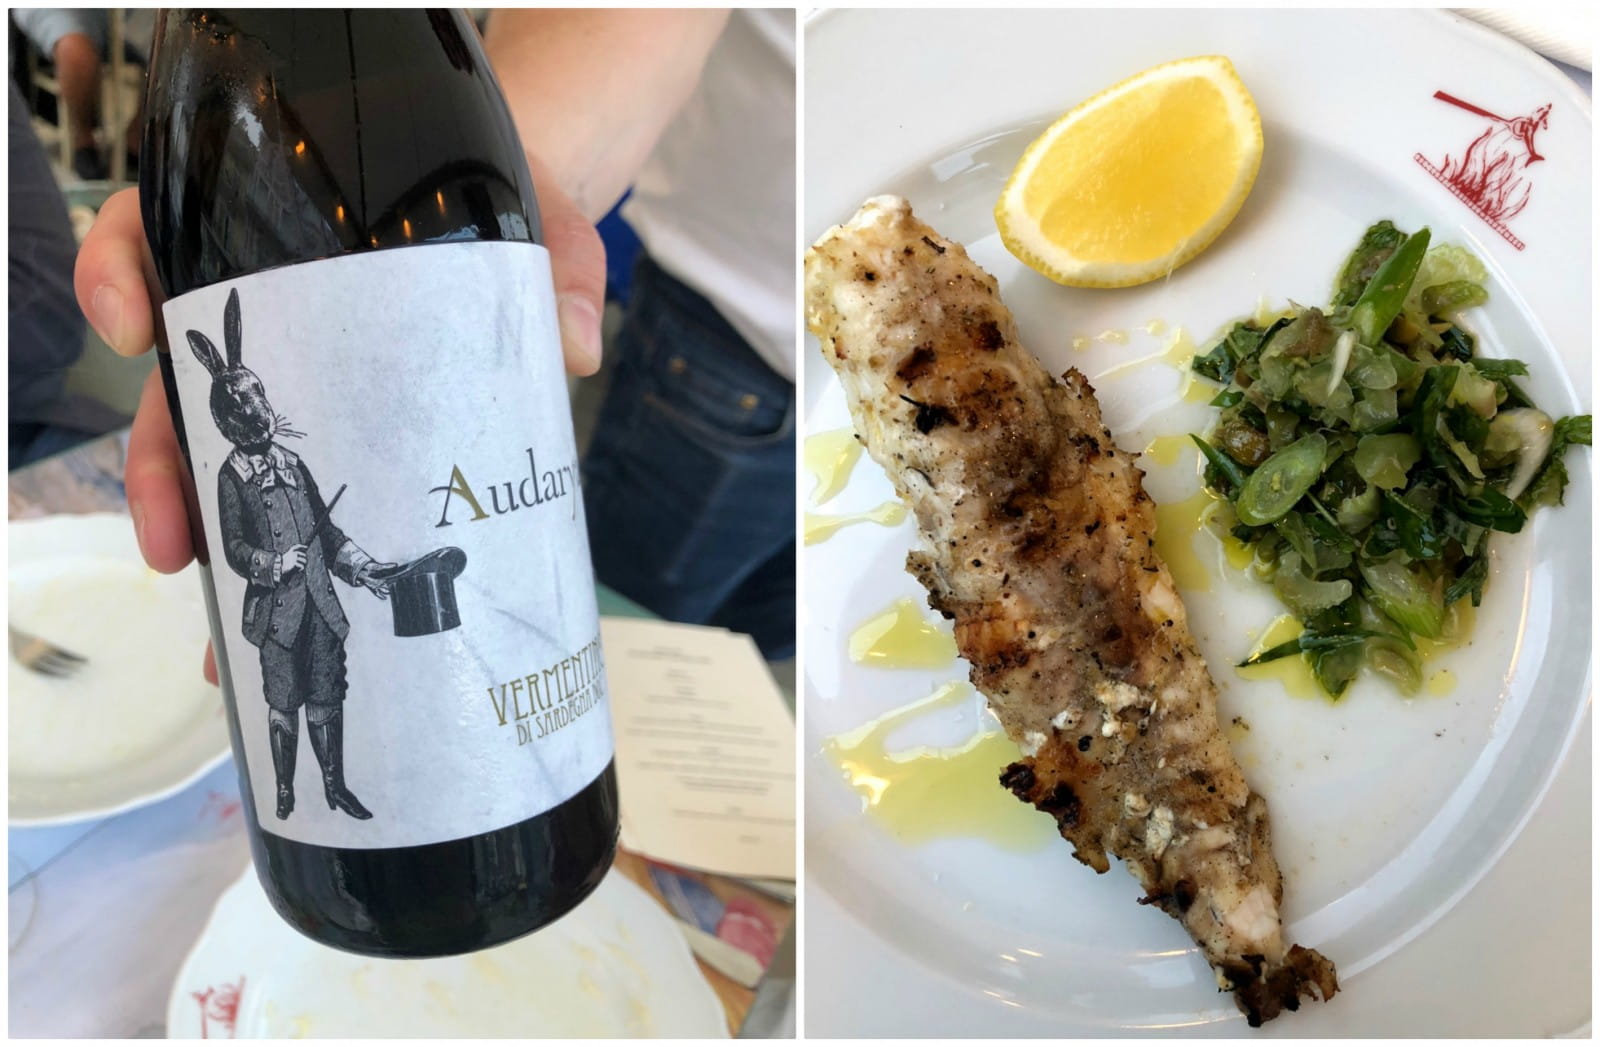 Grilled monkfish with salsa verde and vermentino